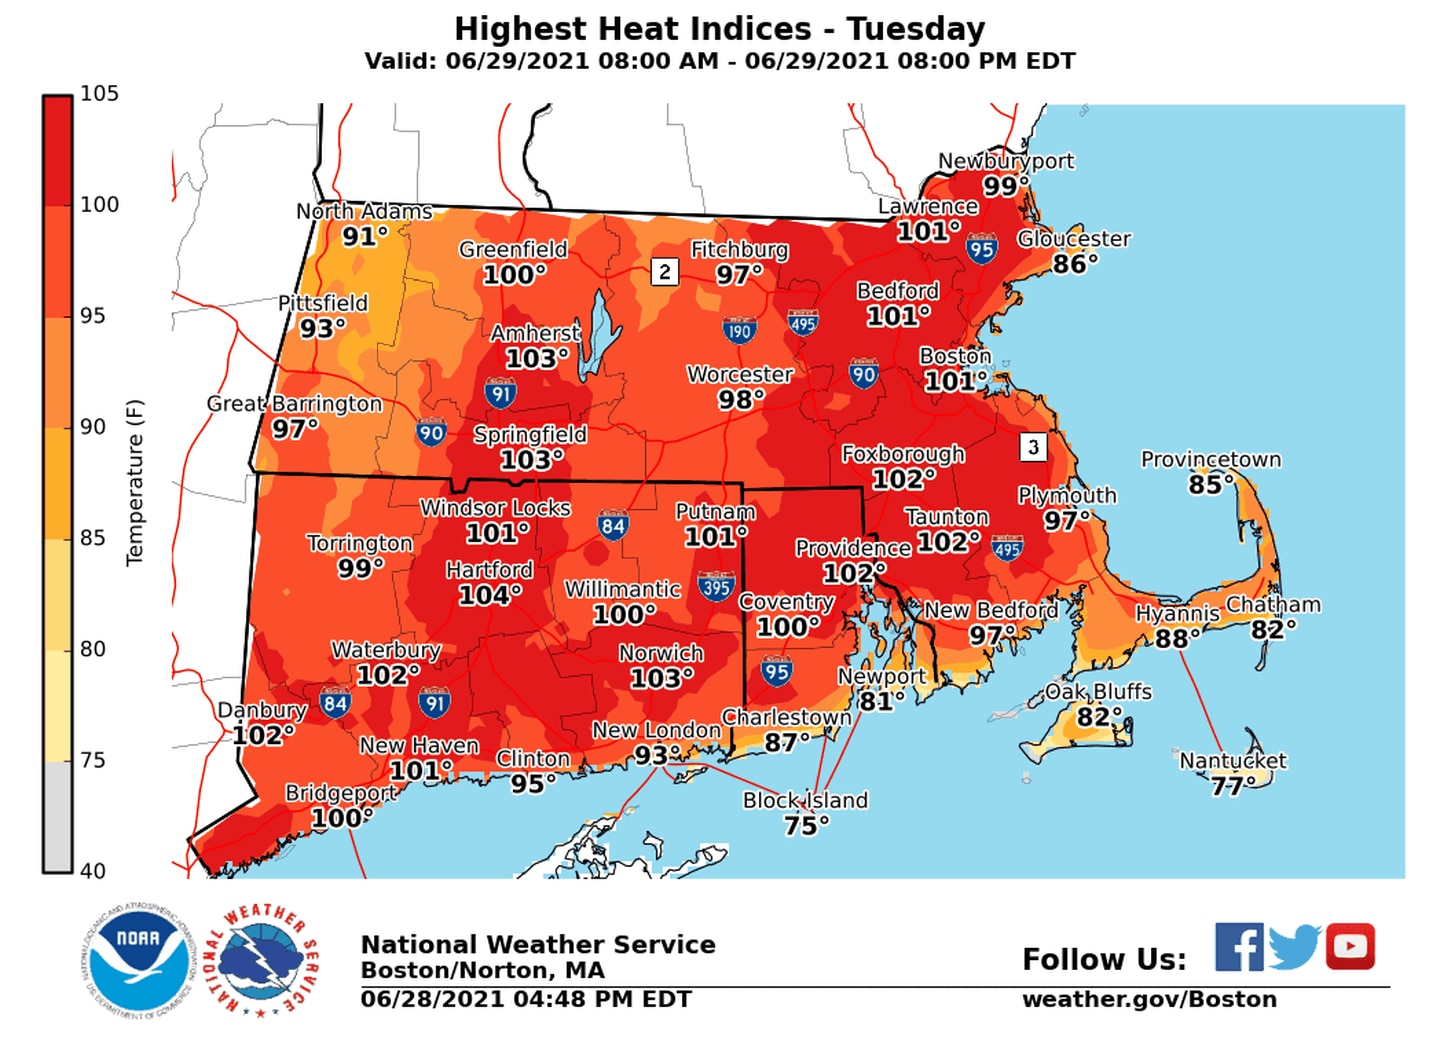 Heat indices in June in my state